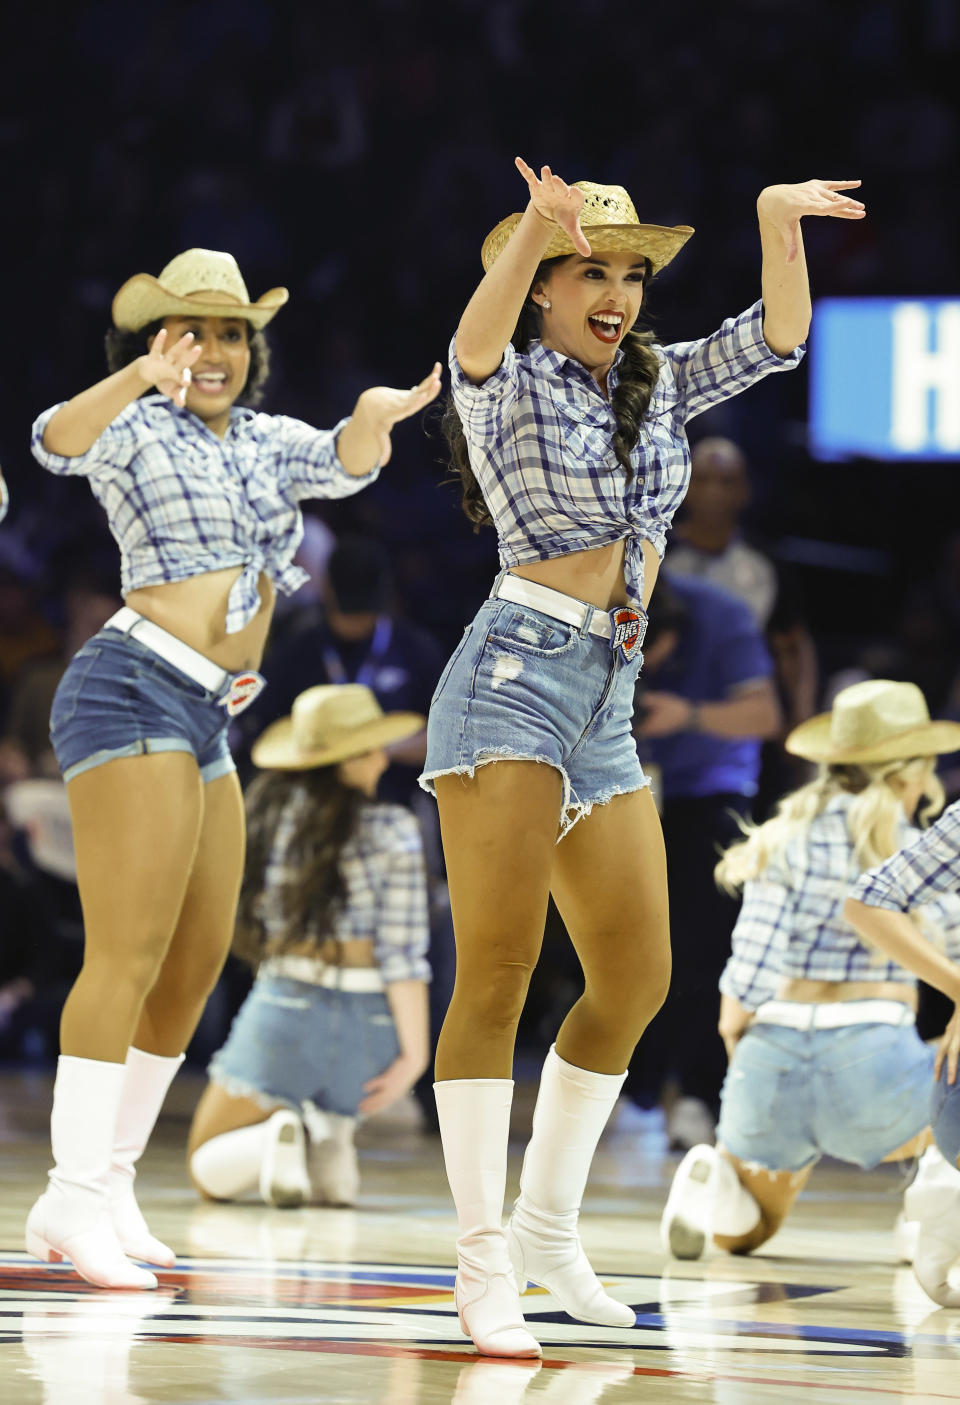 Dec 18, 2023; Oklahoma City, Oklahoma, USA; Oklahoma City Thunder Girls perform during a time out against the Memphis Grizzlies during the second quarter at Paycom Center. Mandatory Credit: Alonzo Adams-USA TODAY Sports